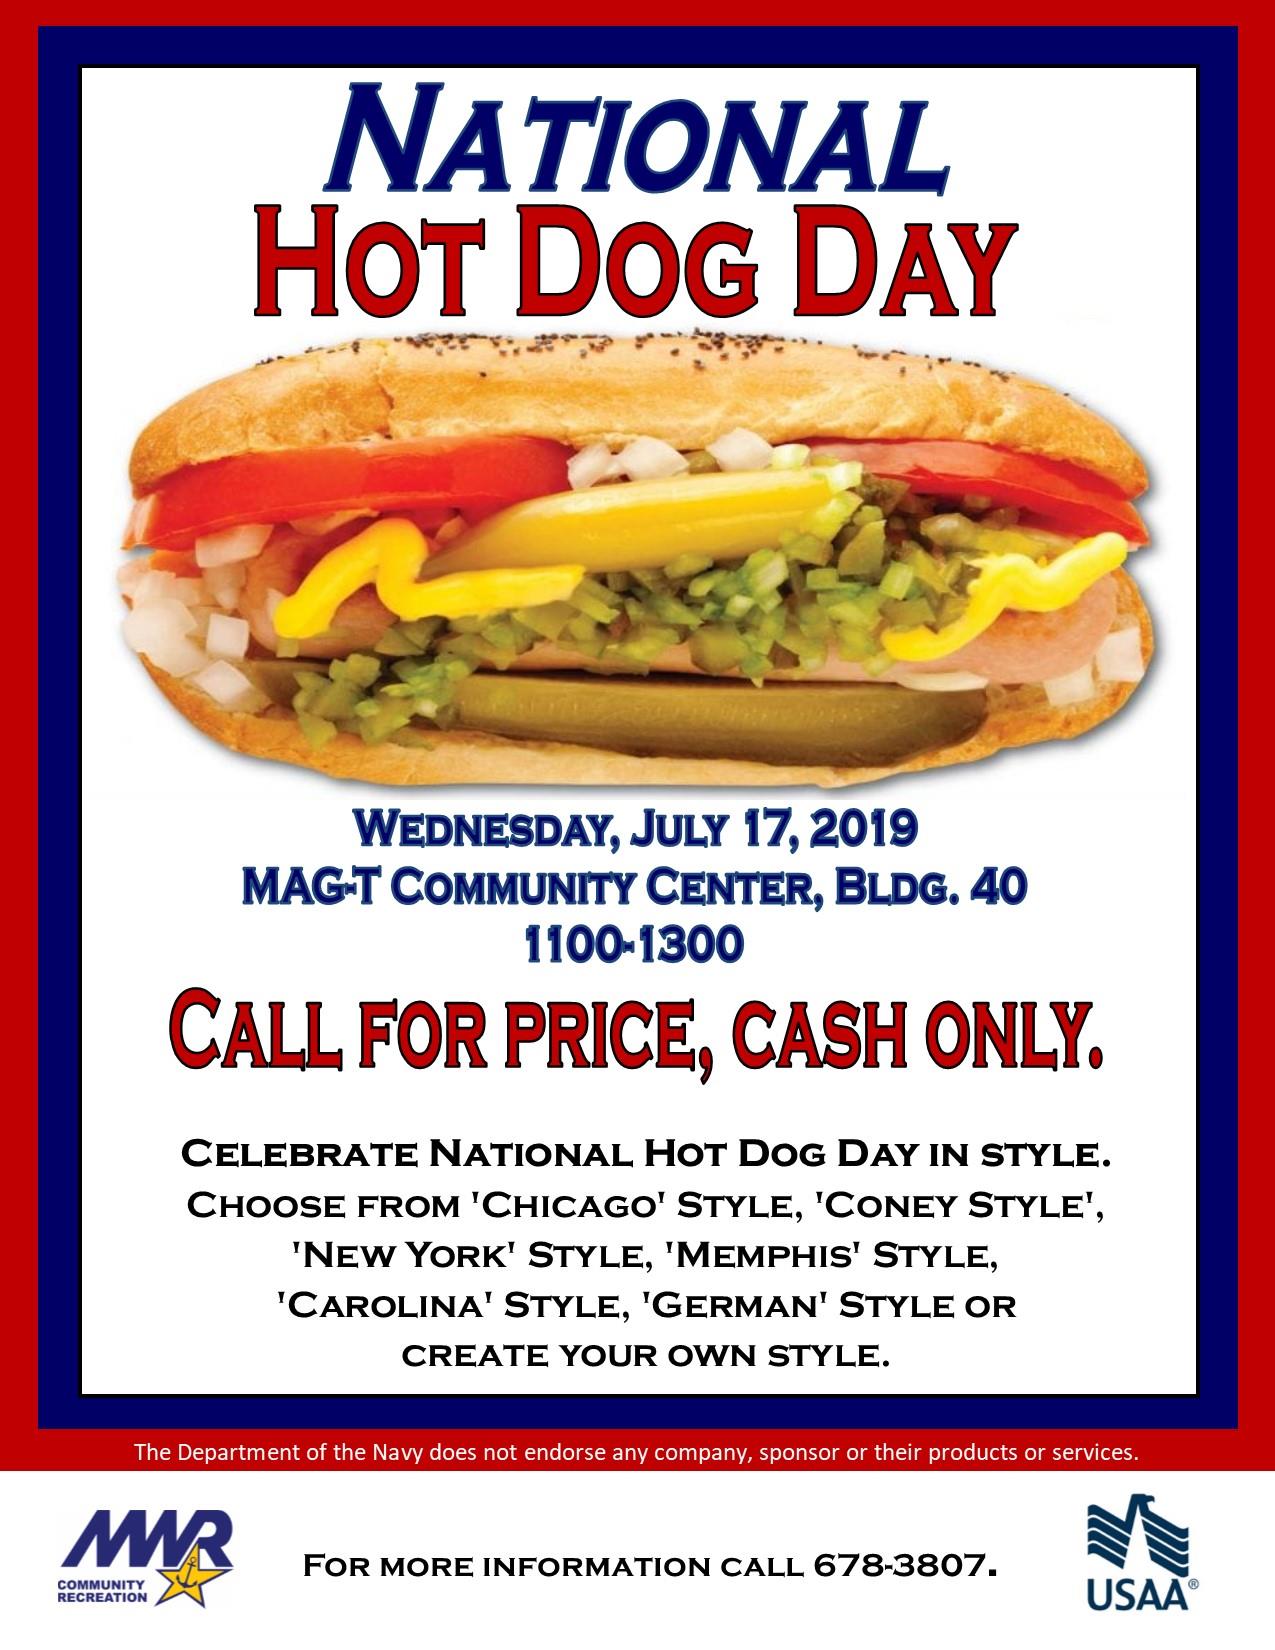 It's National Hot Dog Day! Click here